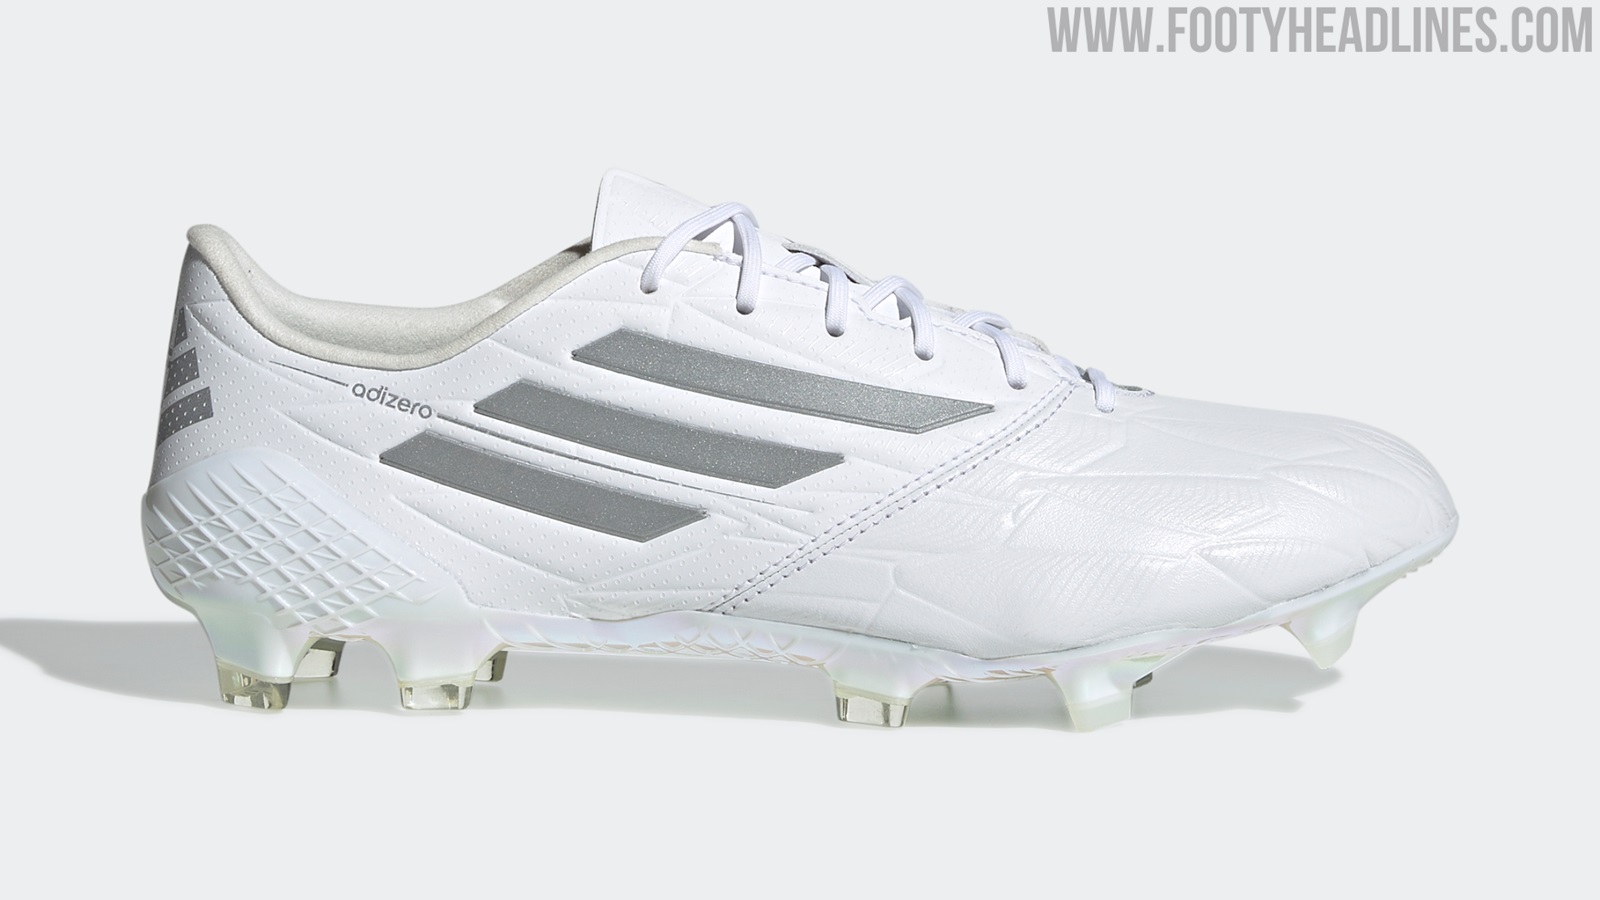 Adidas Adizero IV Leather 2022 Remake Boots - Inspired By 2014 World Cup - Footy Headlines